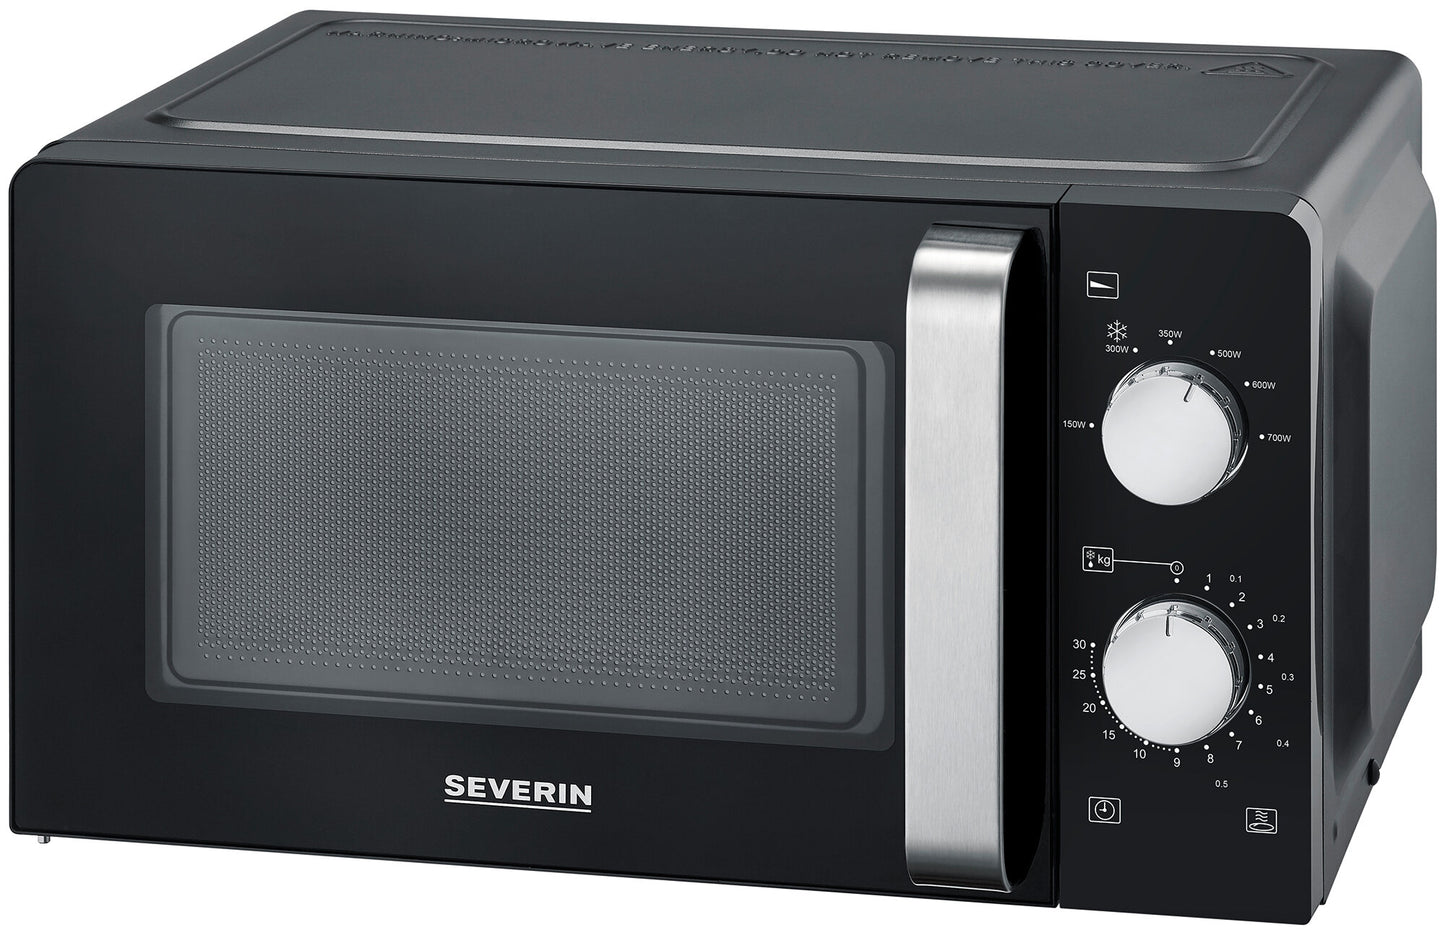 Severin MW 7886 Microwave Oven 17L, Chrome Elements, Defrost Function, 30 Minute Timer